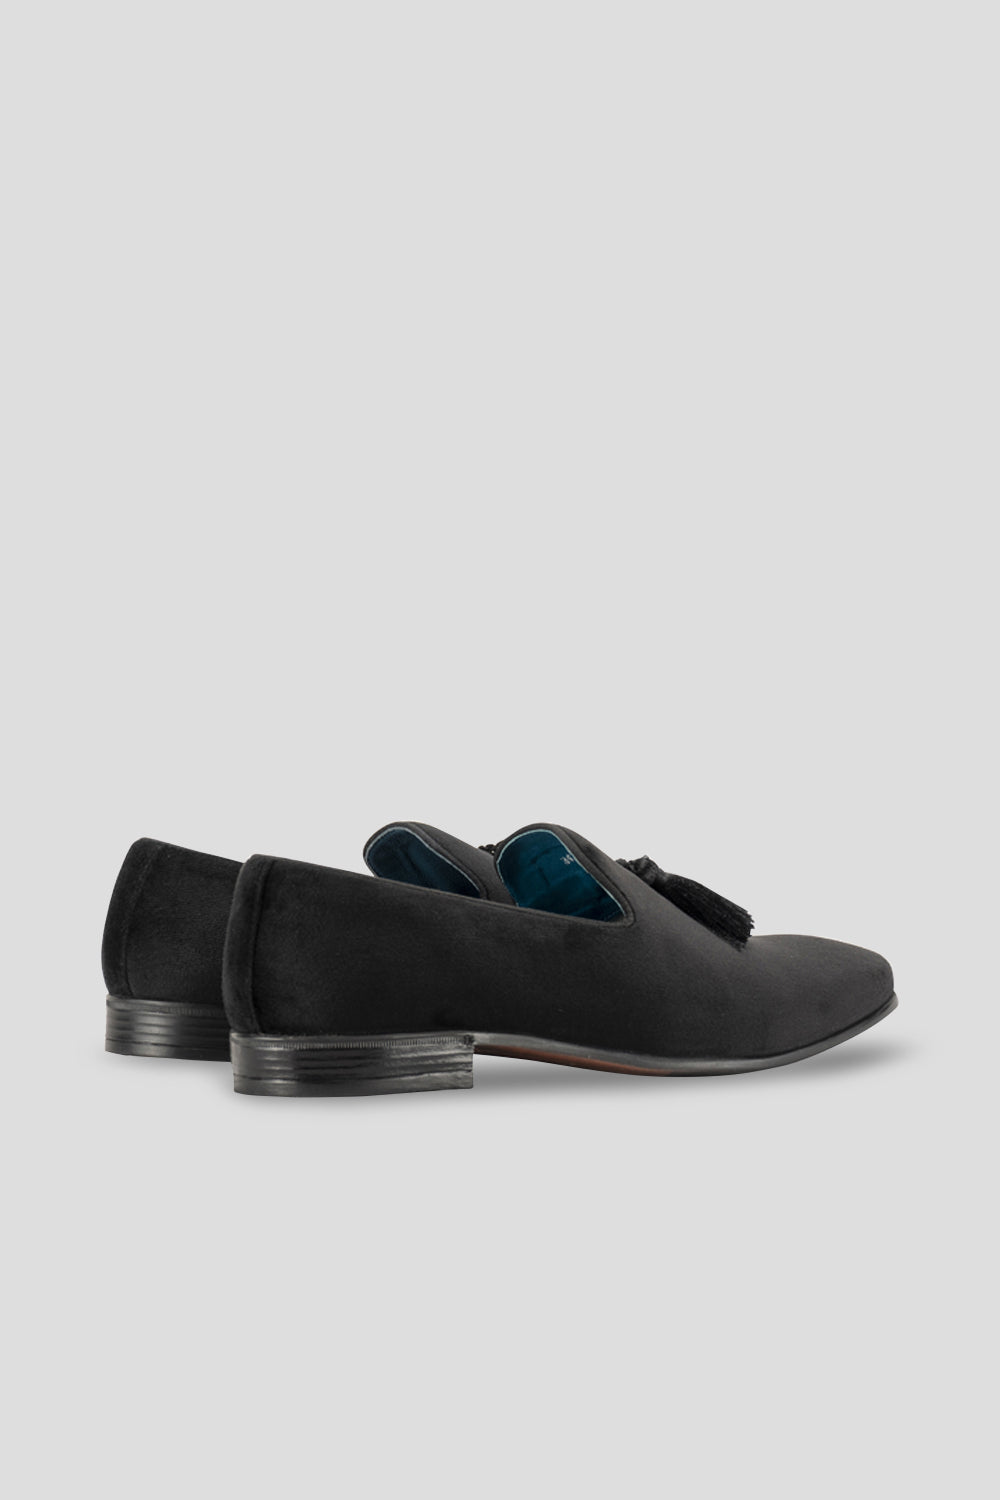 Jabob Mens party loafers with tassel in black